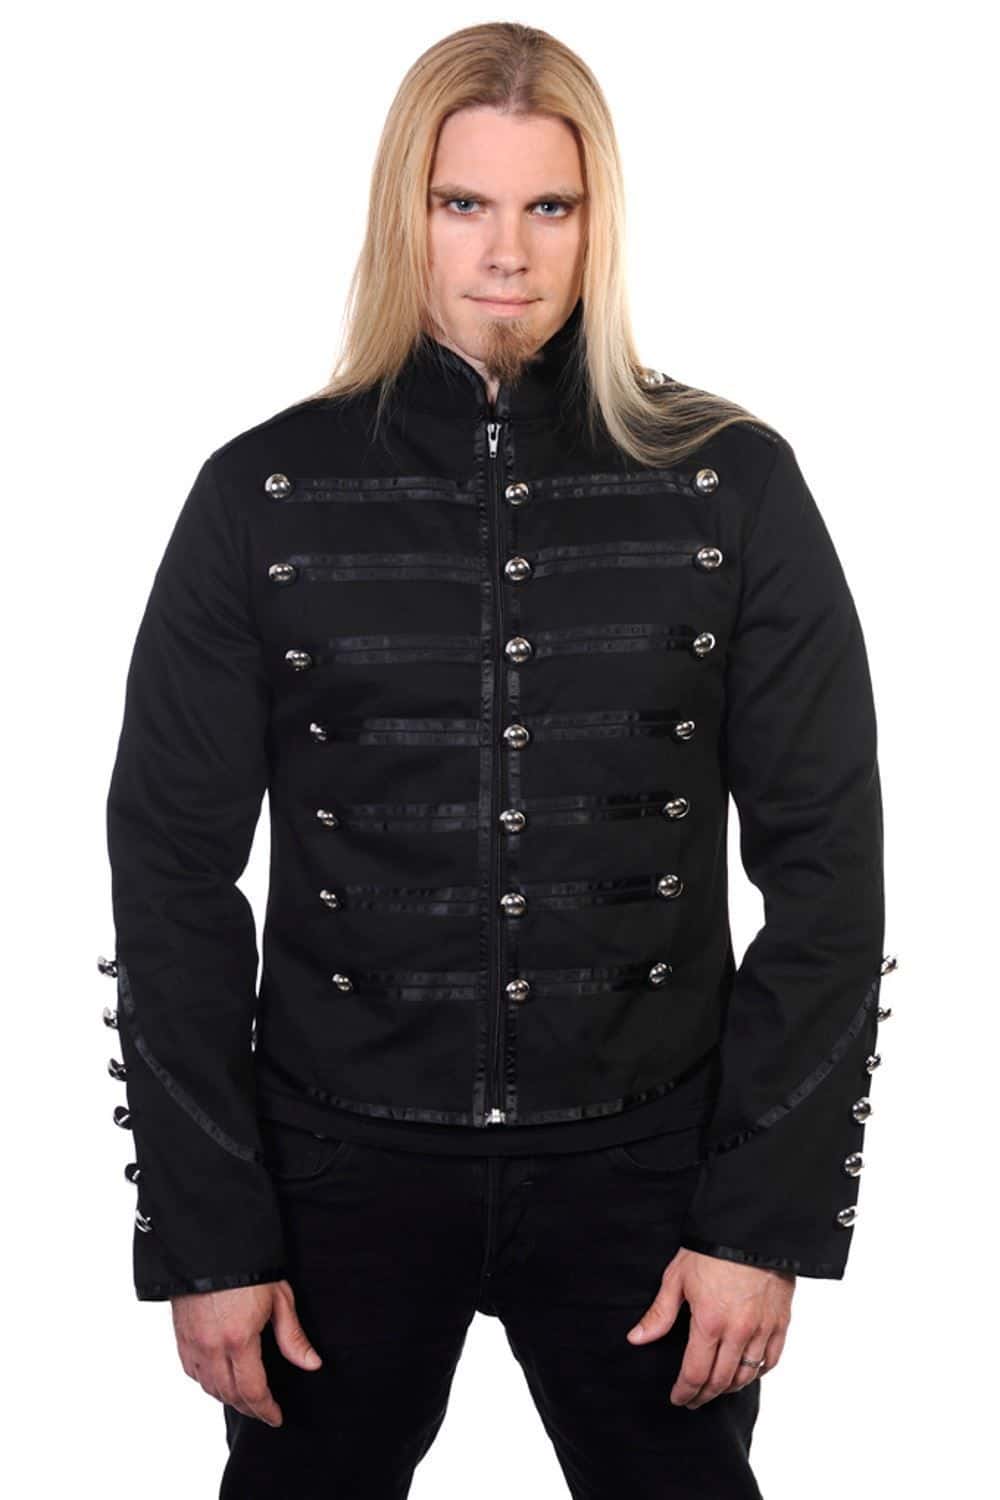 military marching band jacket